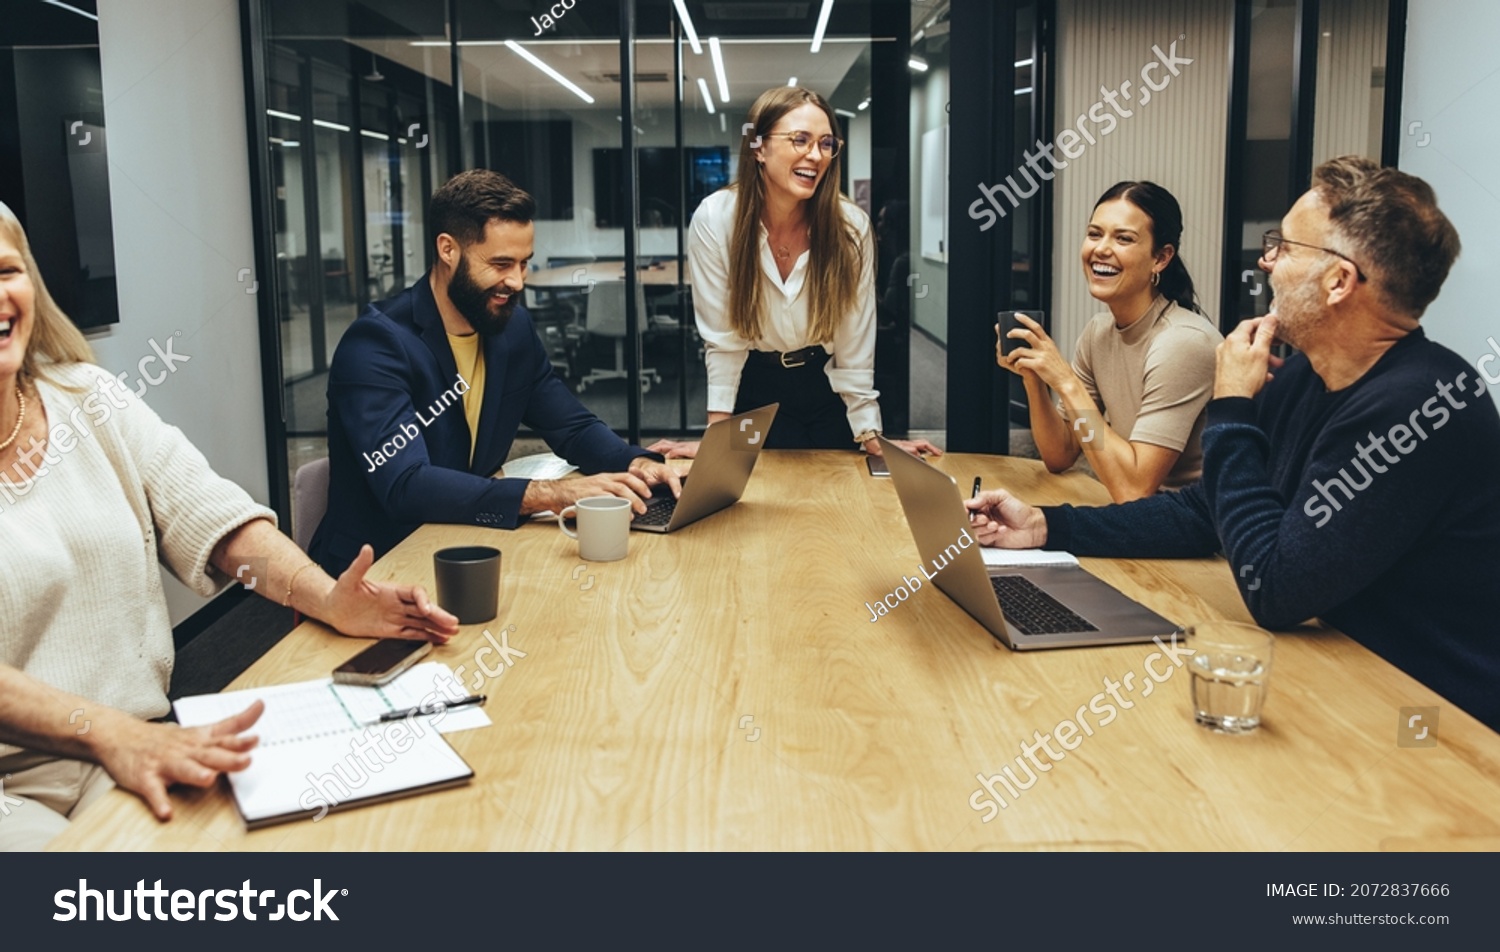 Colleagues laughing cheerfully during a meeting in a boardroom. Group of happy businesspeople enjoying working together in a modern workplace. Successful business professionals collaborating. #2072837666